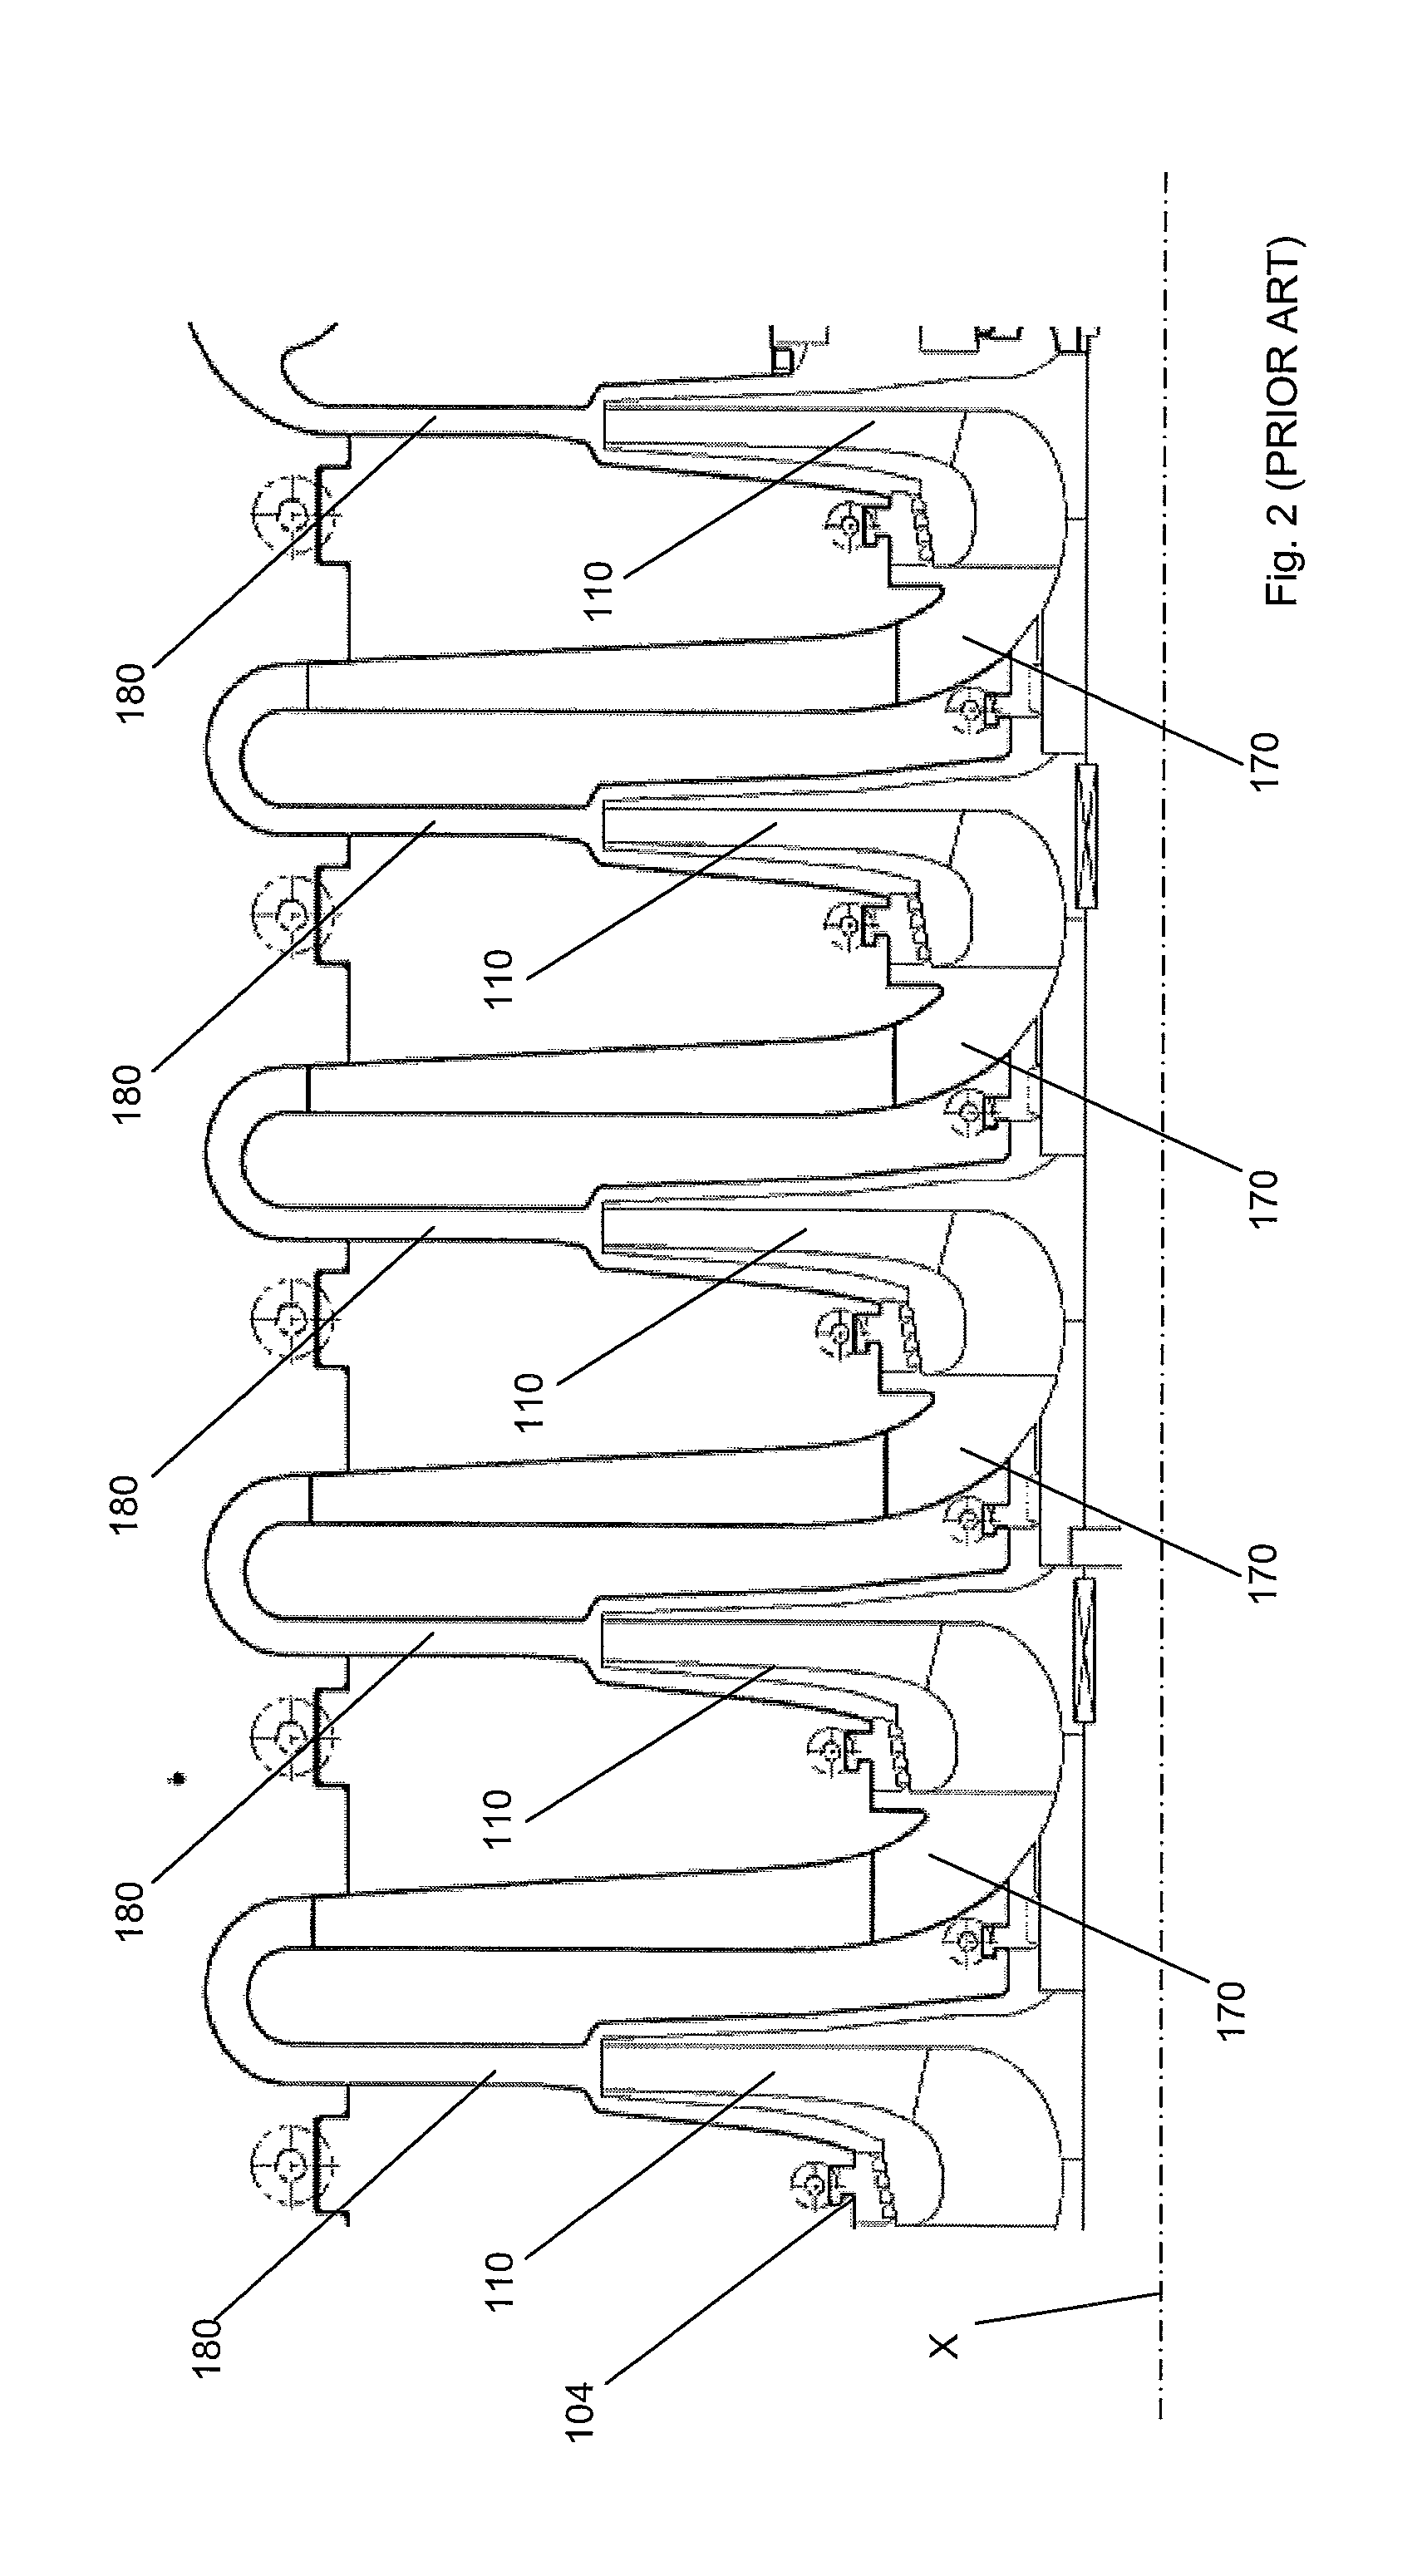 Centrifugal impeller and turbomachine